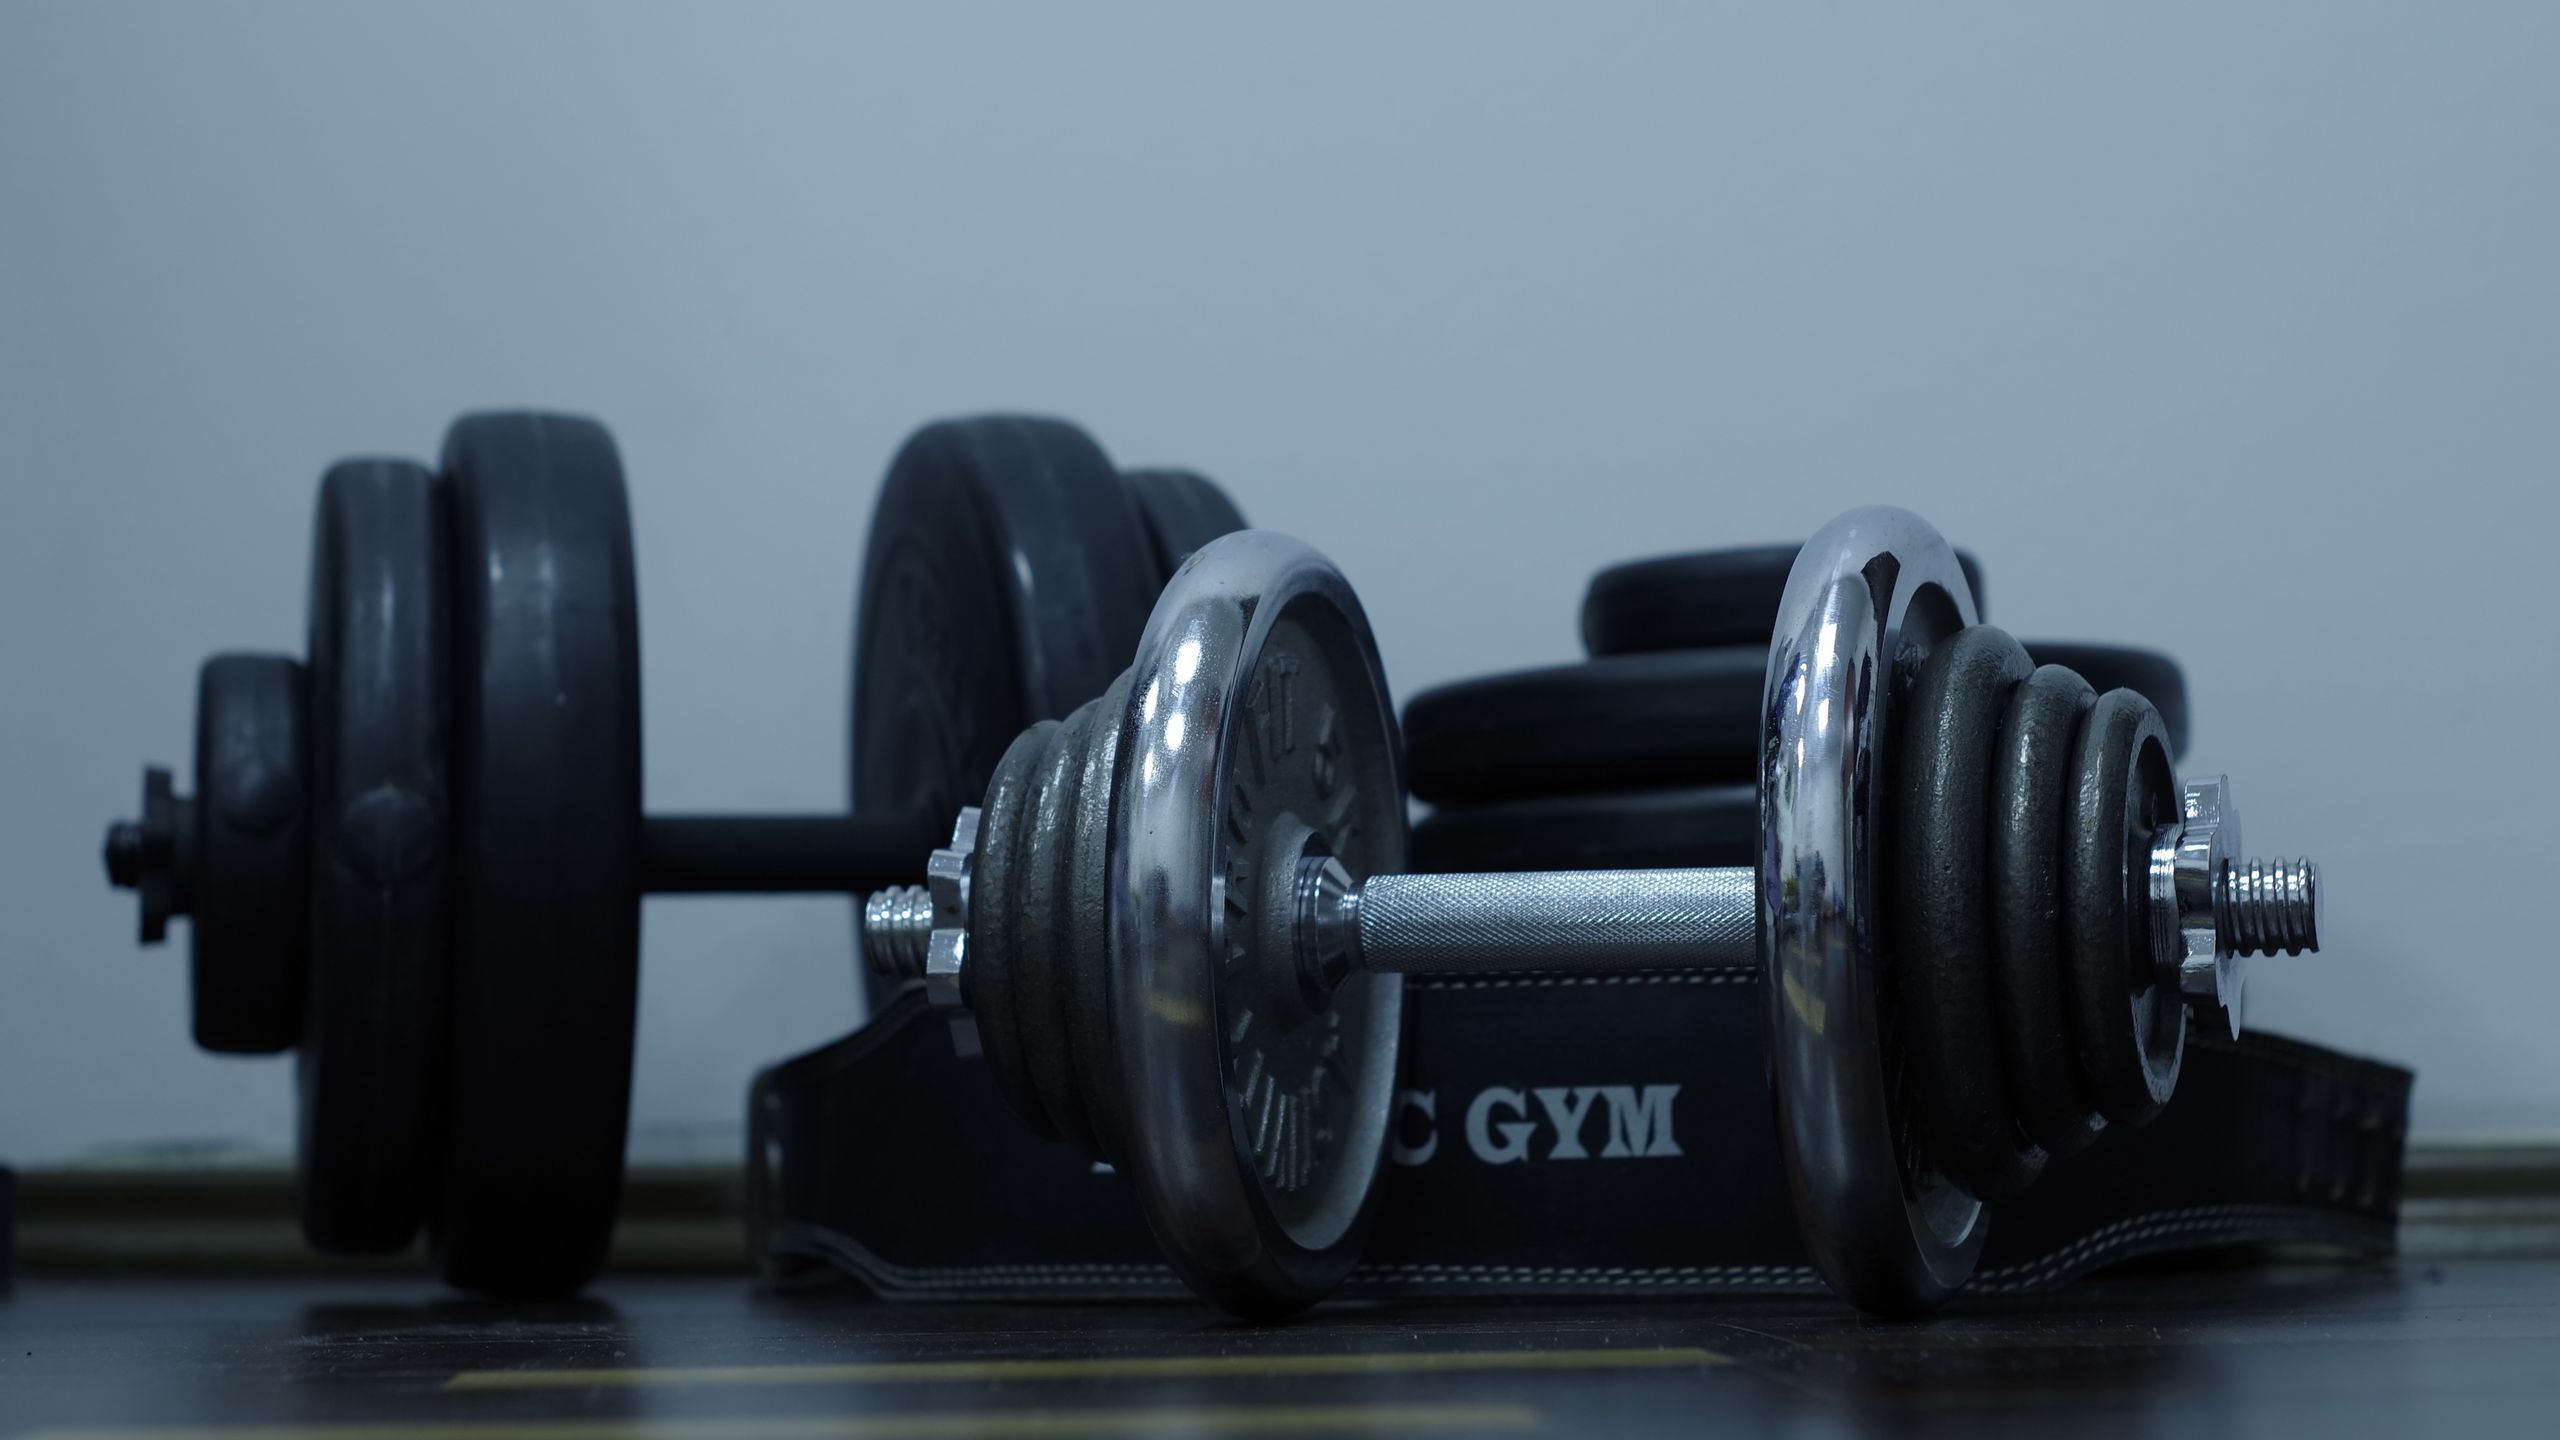 Gym Equipment Background Images HD Pictures and Wallpaper For Free  Download  Pngtree